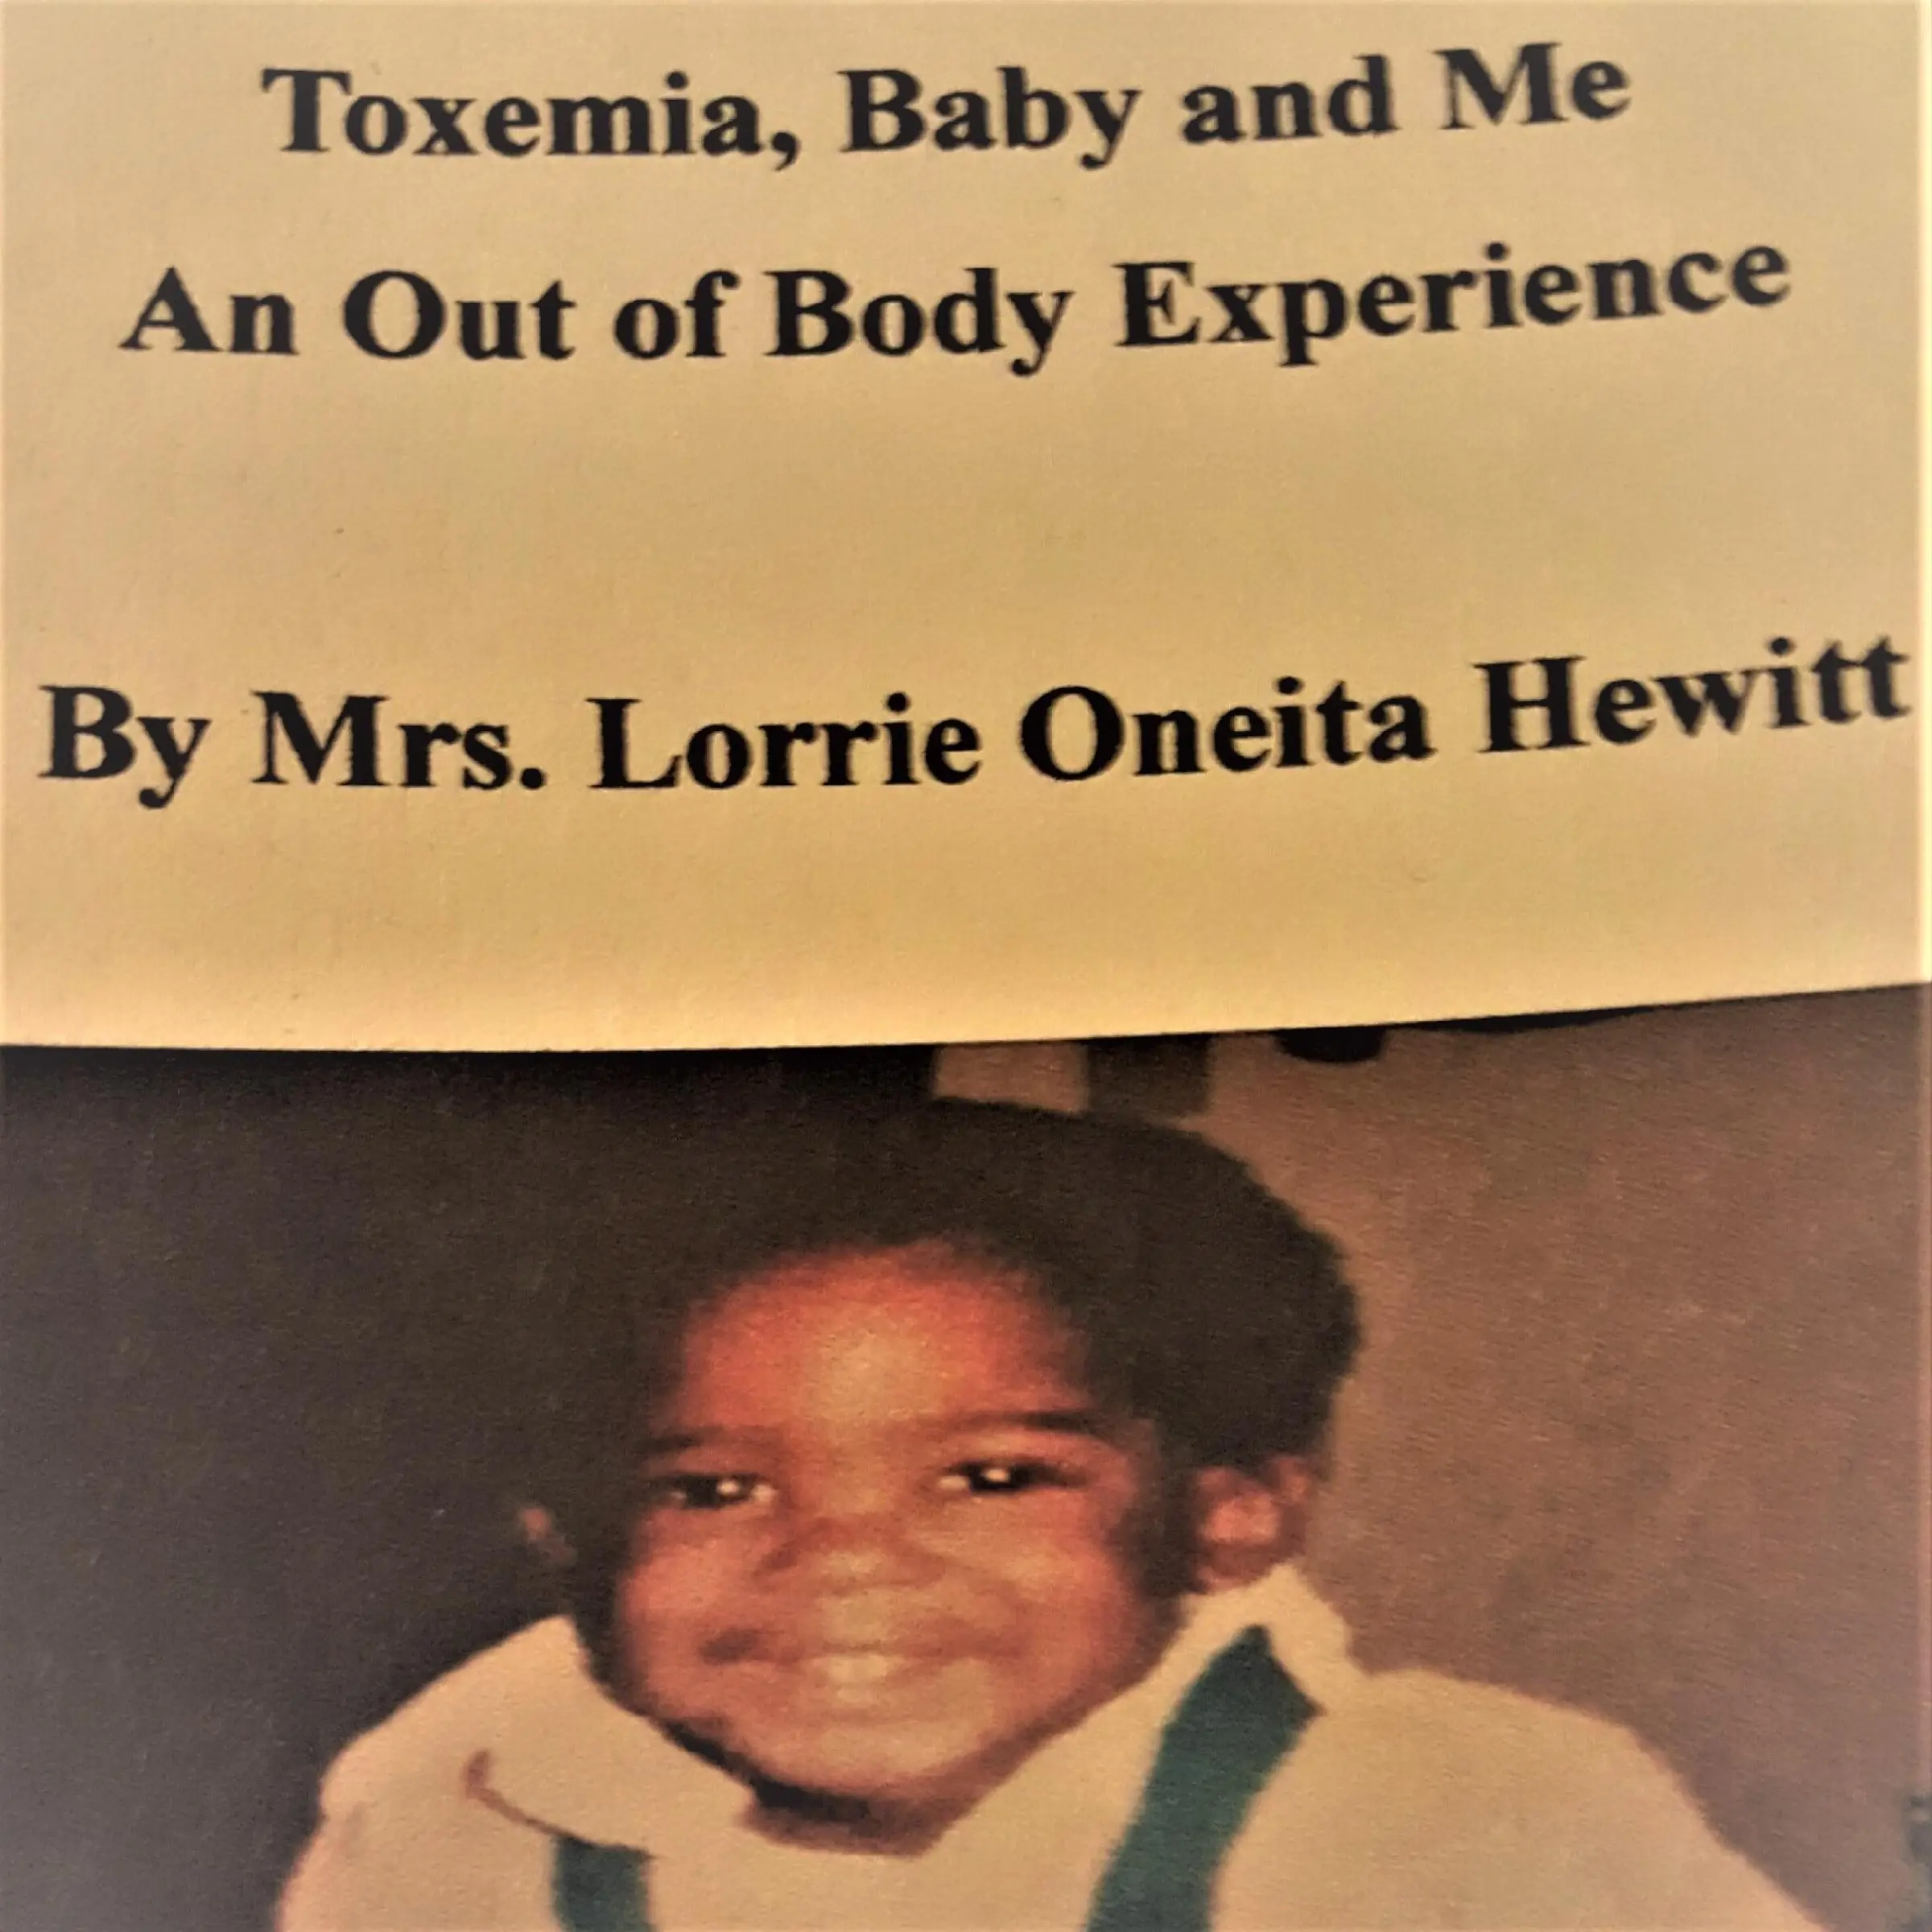 Toxemia, Baby and Me An Out of Body Experience by Mrs. Lorrie Oneita Hewitt Audiobook